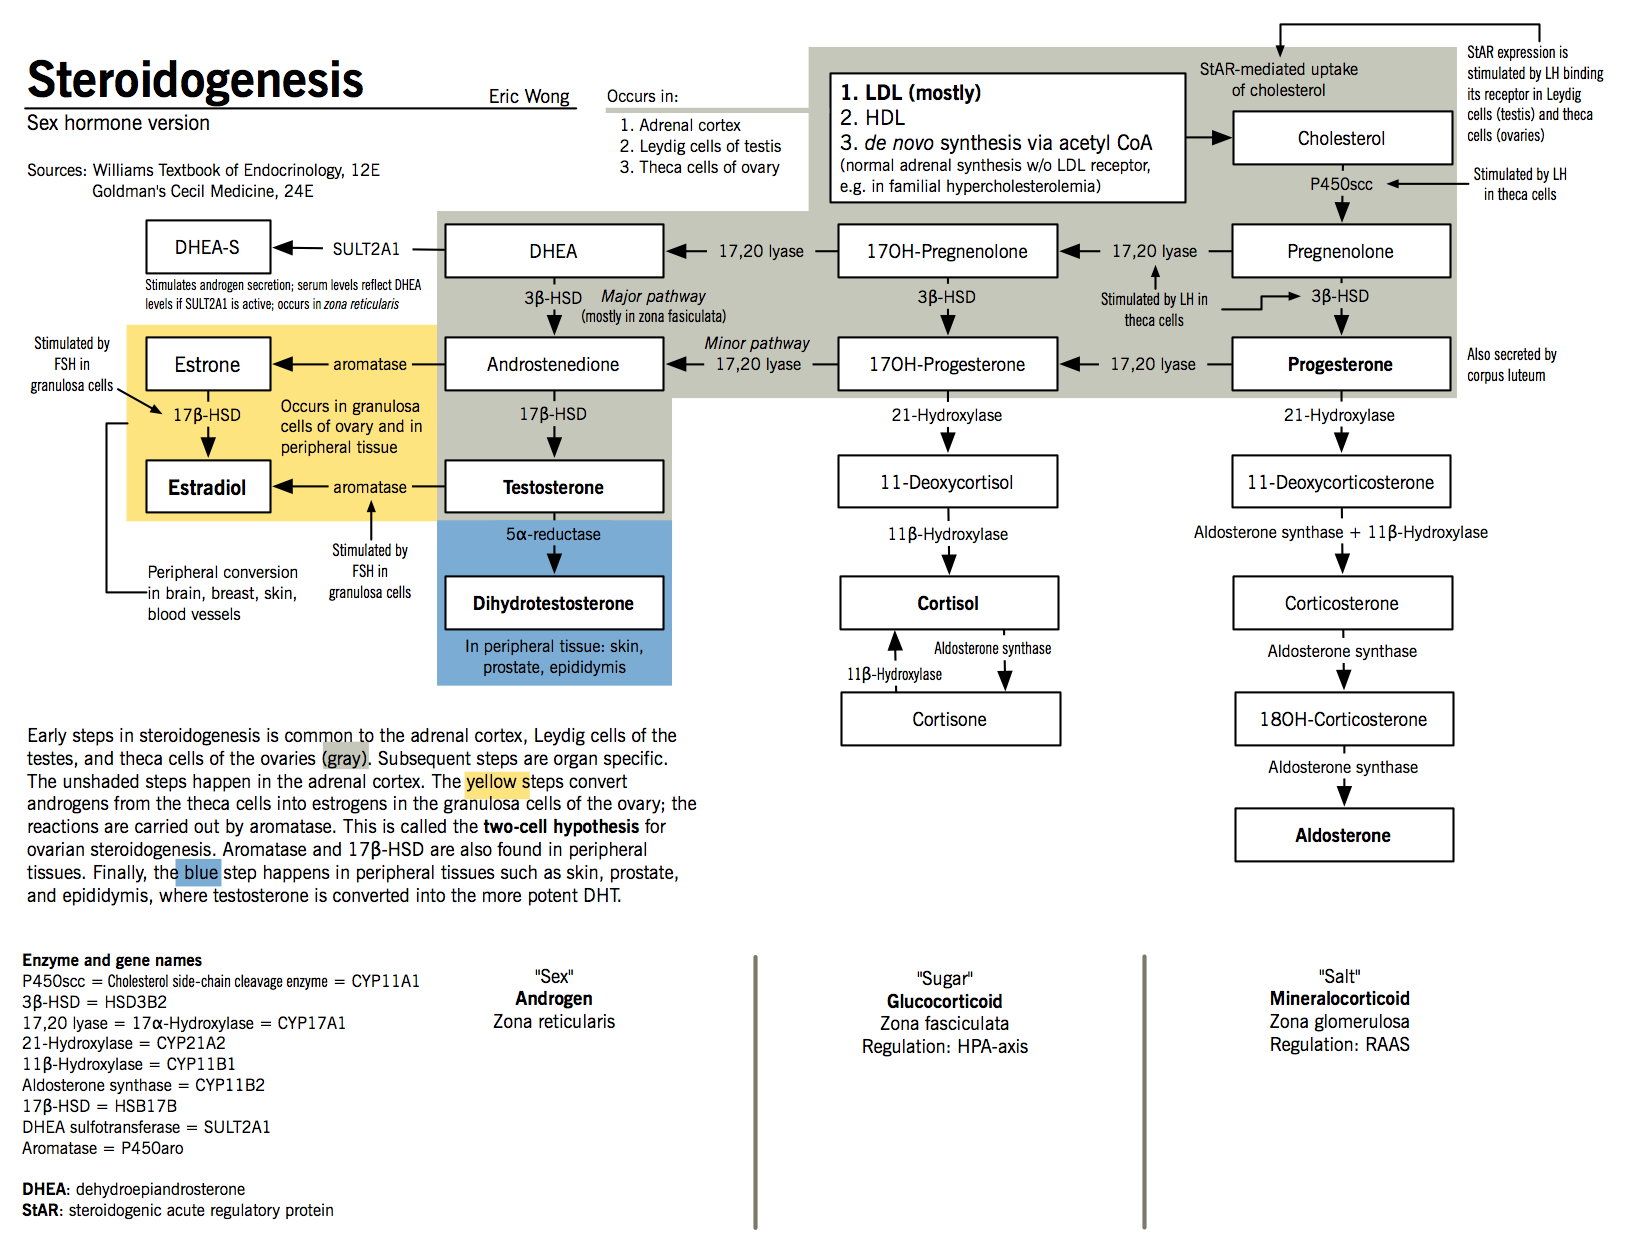 Steroidogenesis - sex hormone synthesis